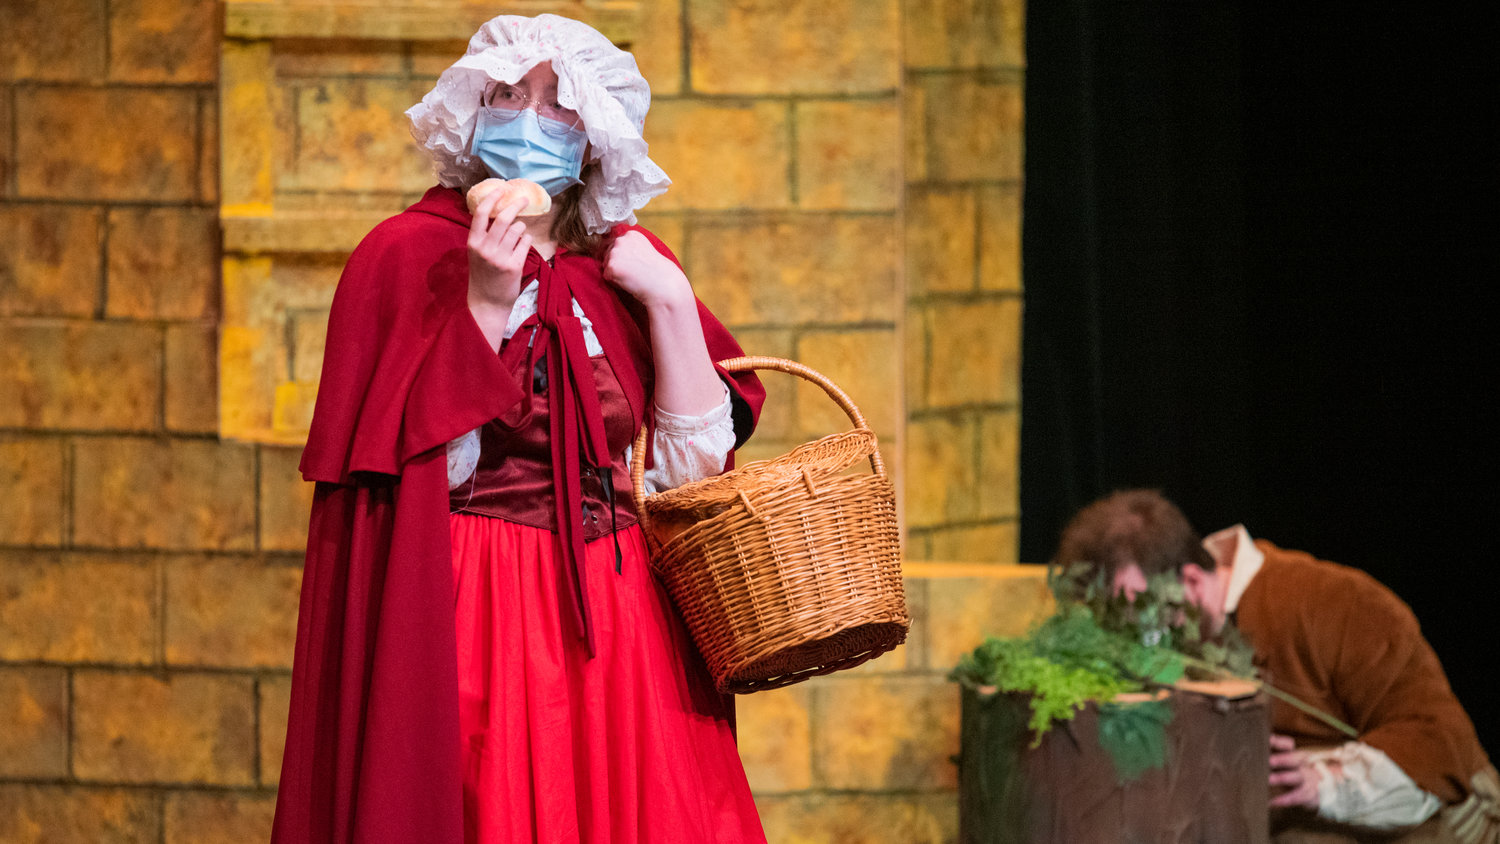 Emily Cole holds bread up to a mask while playing Little Red Riding Hood during dress rehearsals for “Into The Woods,” presented by the Centralia College Theatre program.